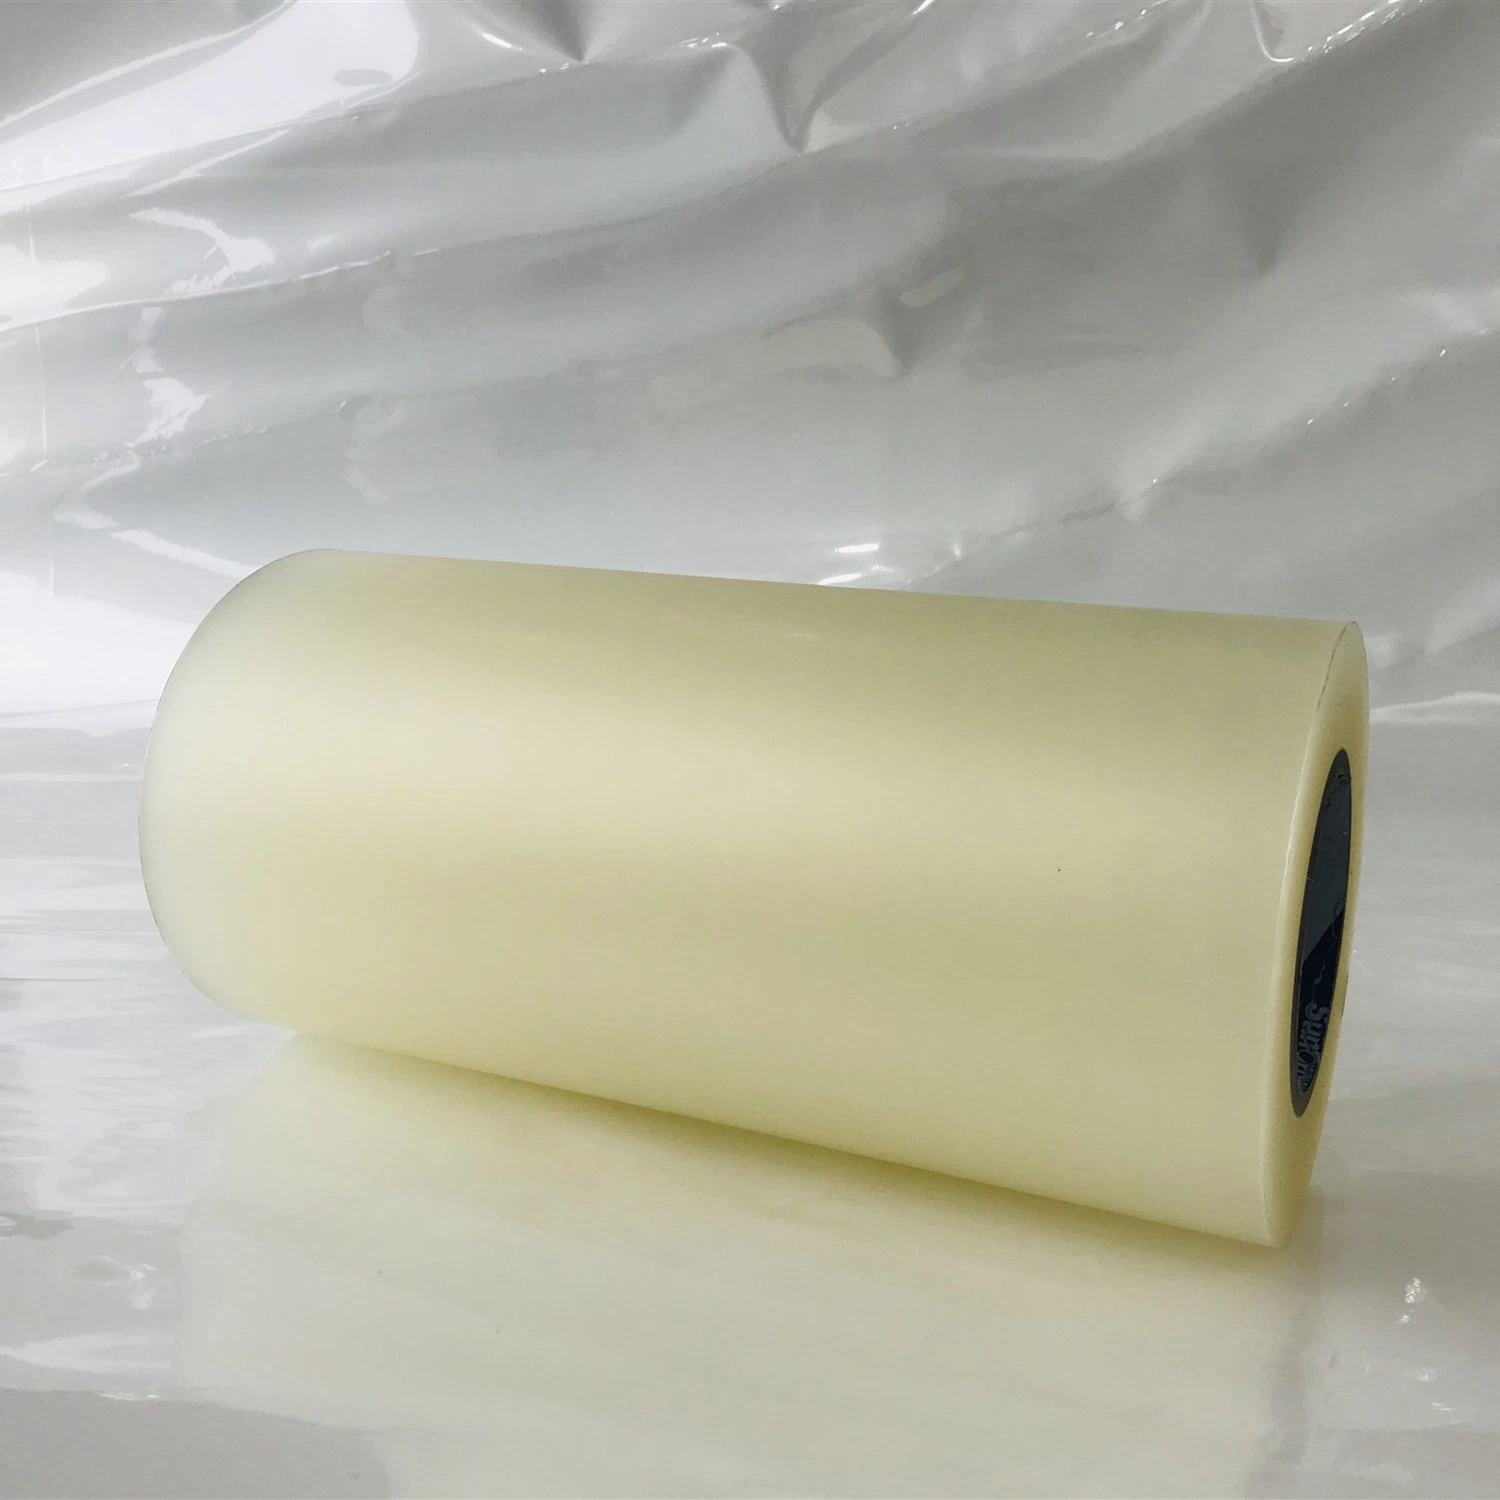 Printed Adhesive Paper for Over Matt Laminating Tape Sp110 with Solvent Base